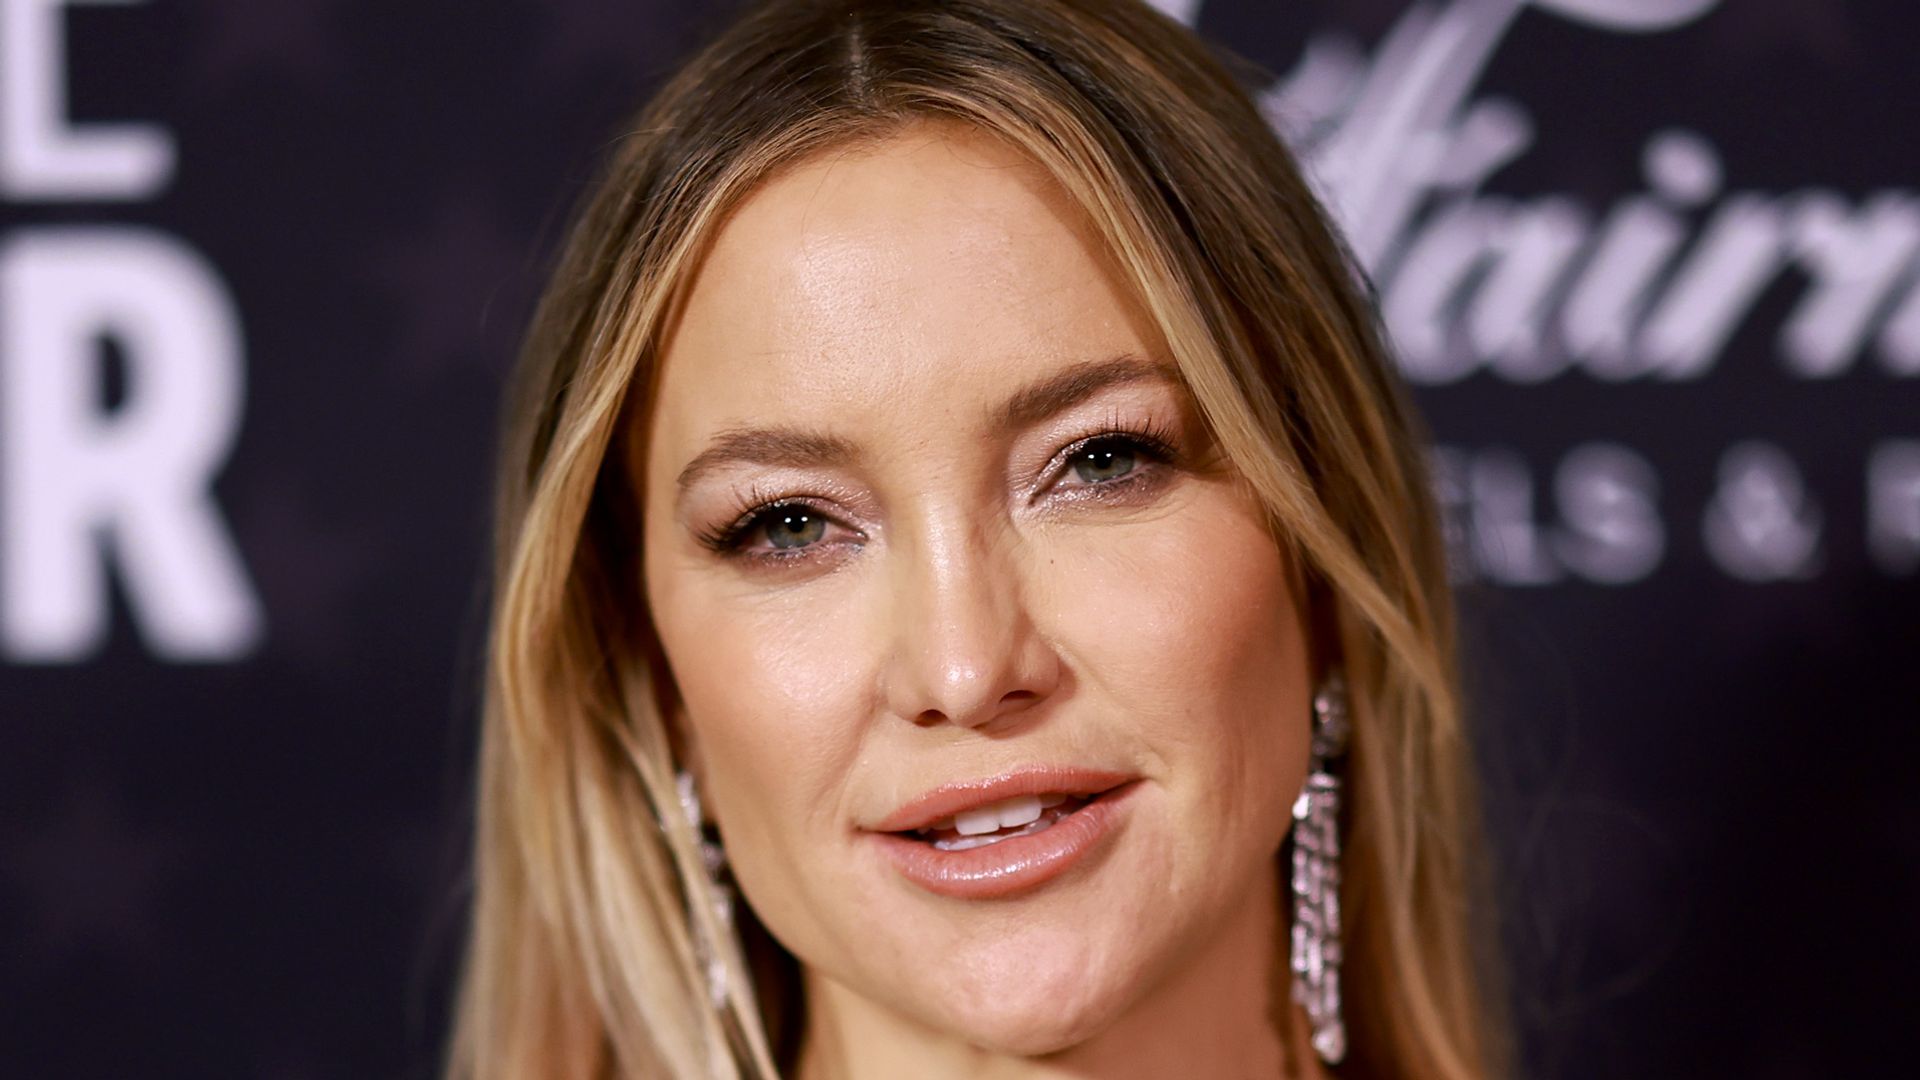 Kate Hudson wows in skirt with thigh-high slit as she enjoys jaw-dropping vacation